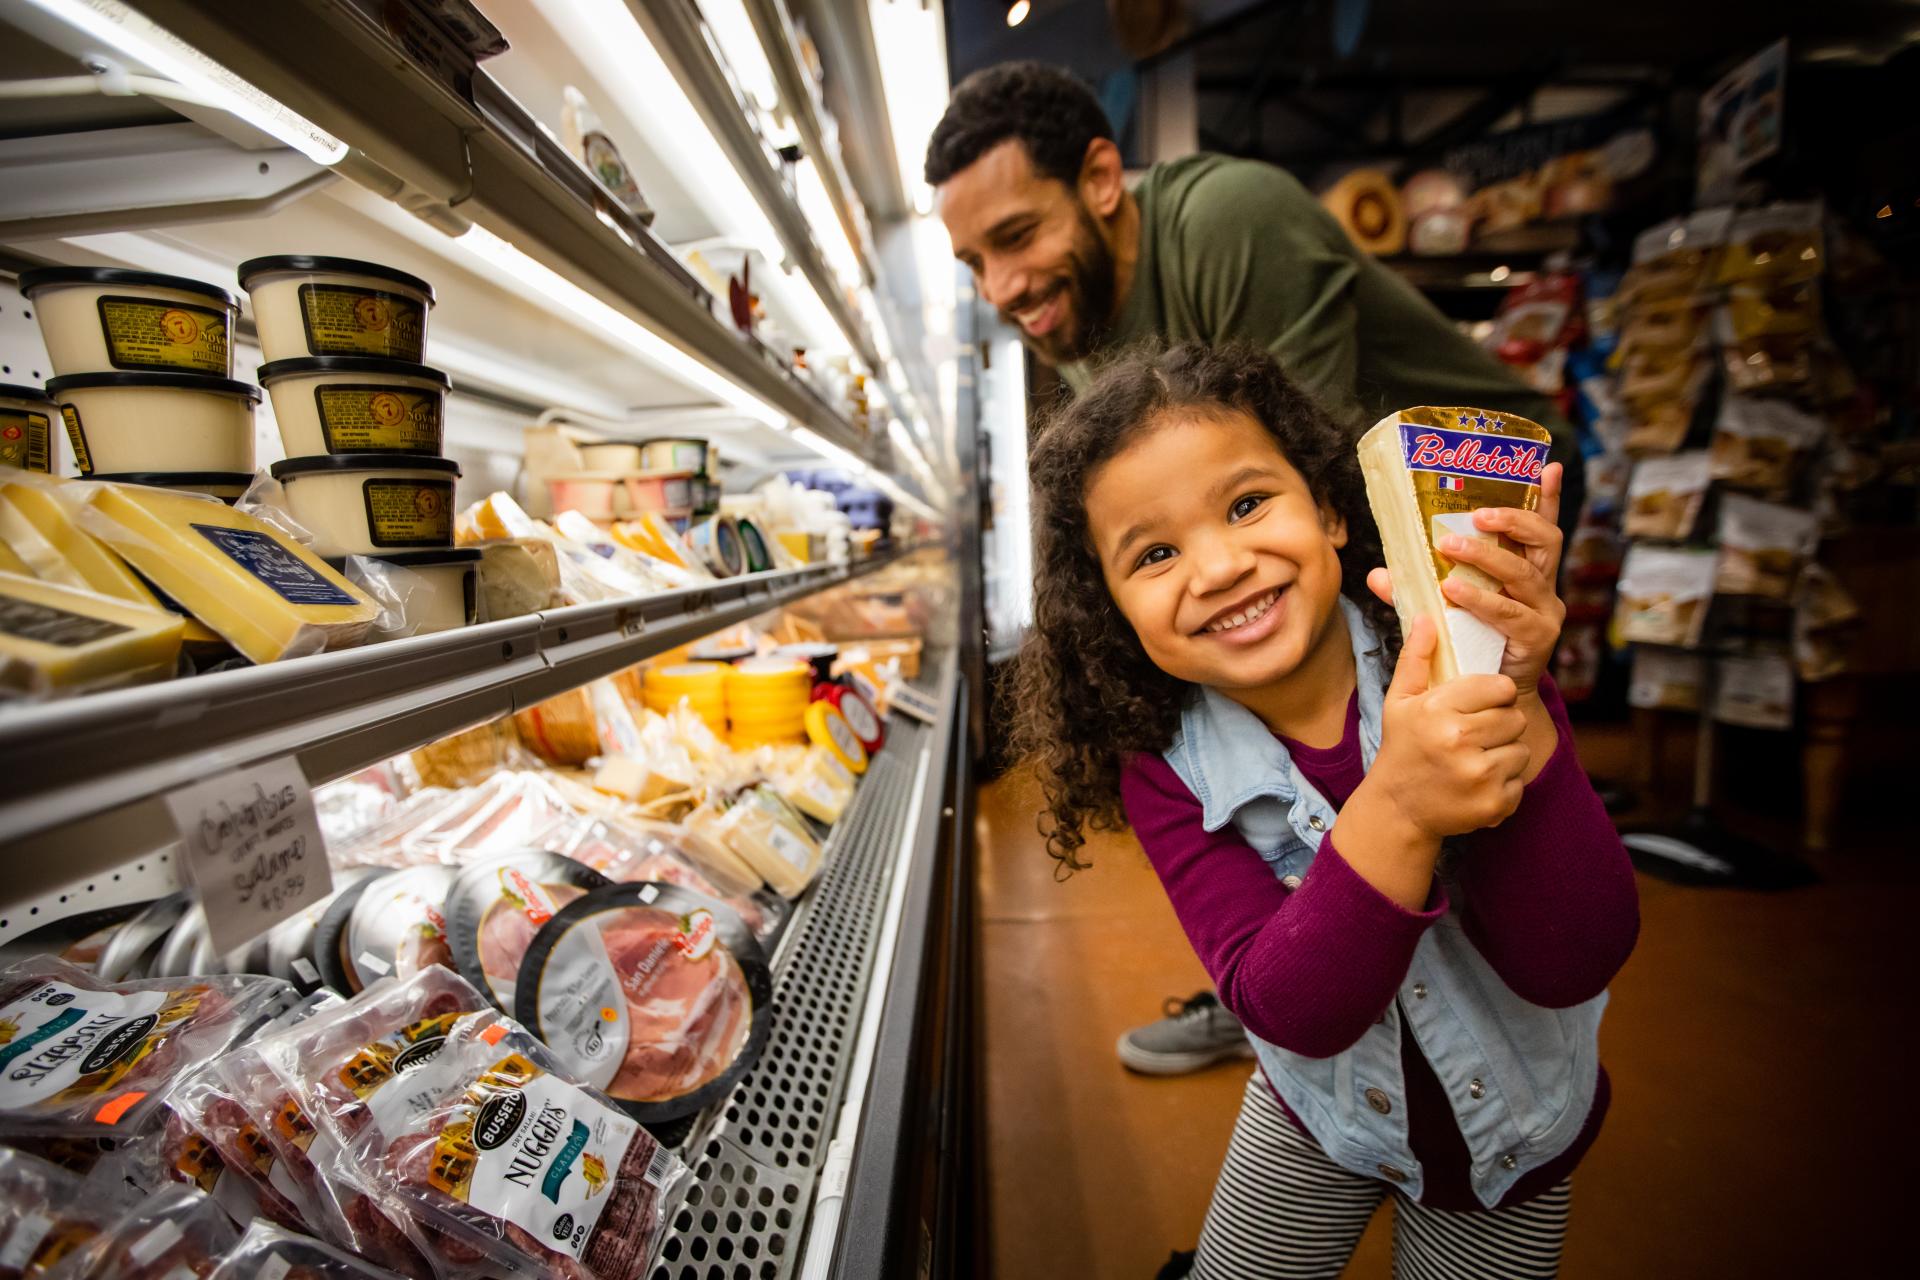 a little girl showing off a wedge of cheese in front of a large deli cooler